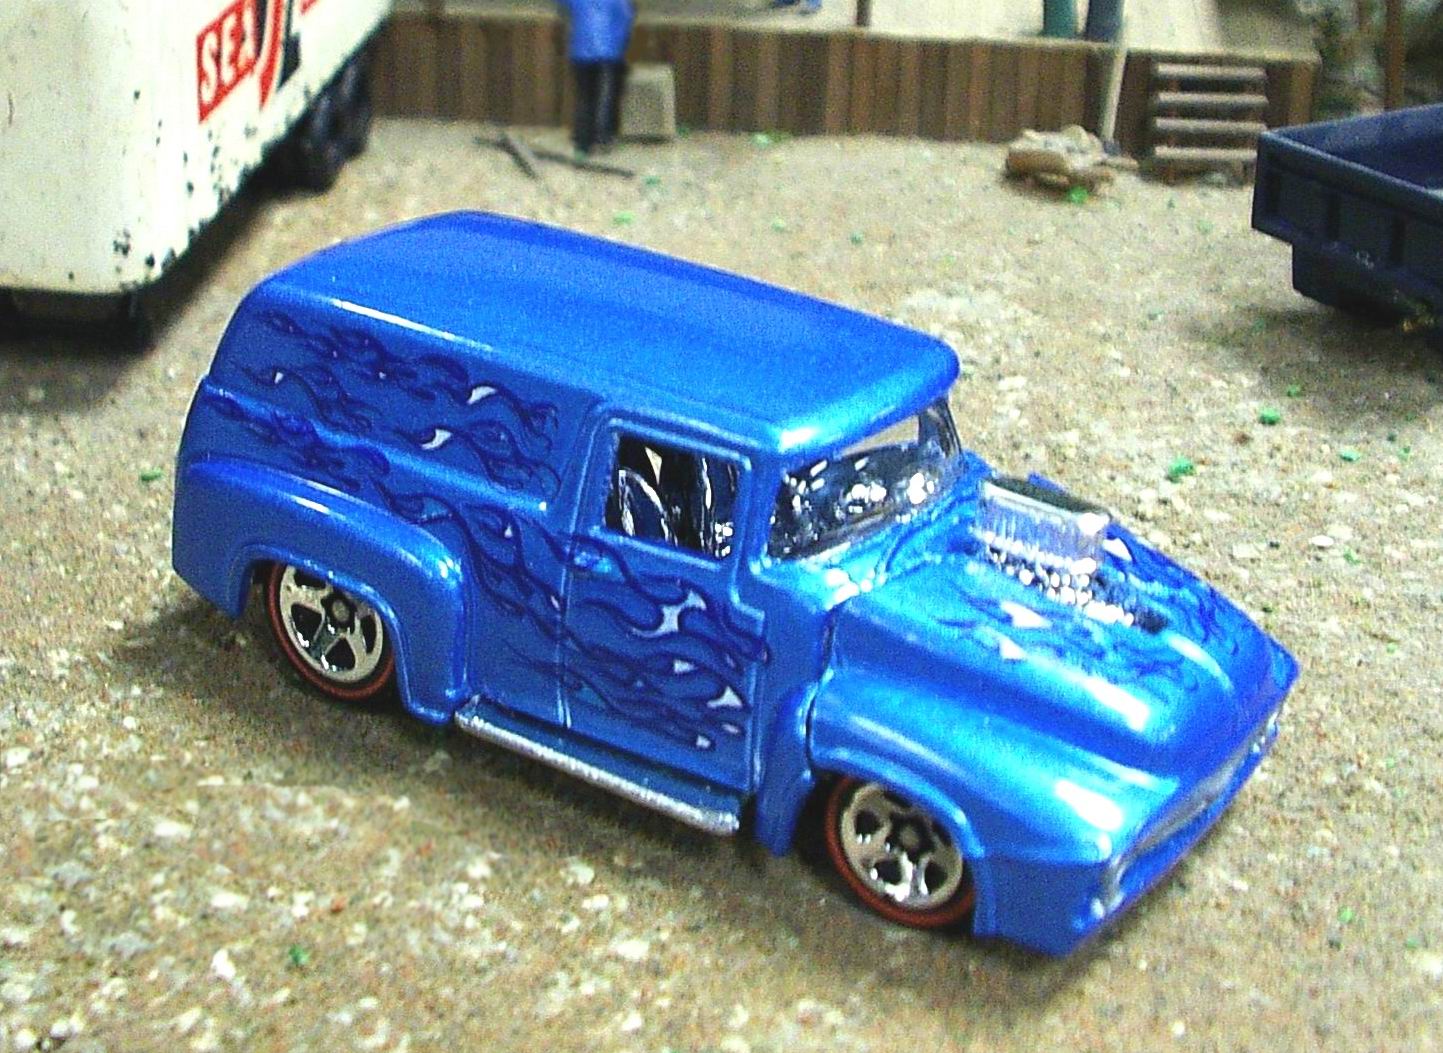 hot wheels 56 ford panel